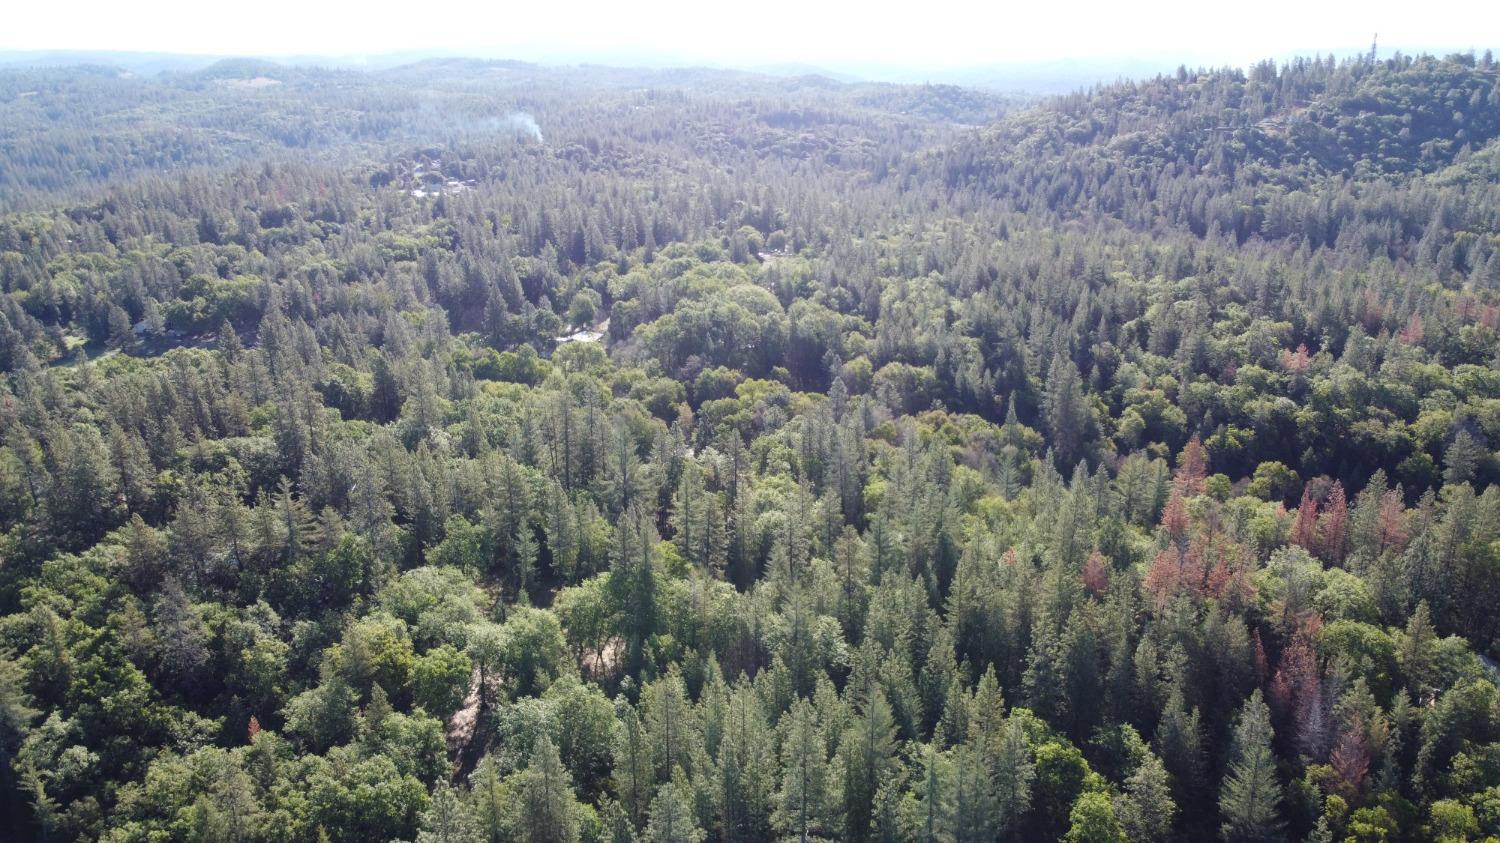 Build your dream home on this affordable almost 6 acre lot in Placerville. This property is in a GREAT location - in the country but only minutes from Target, Starbucks, Safeway, and other shopping and dining in Placerville!